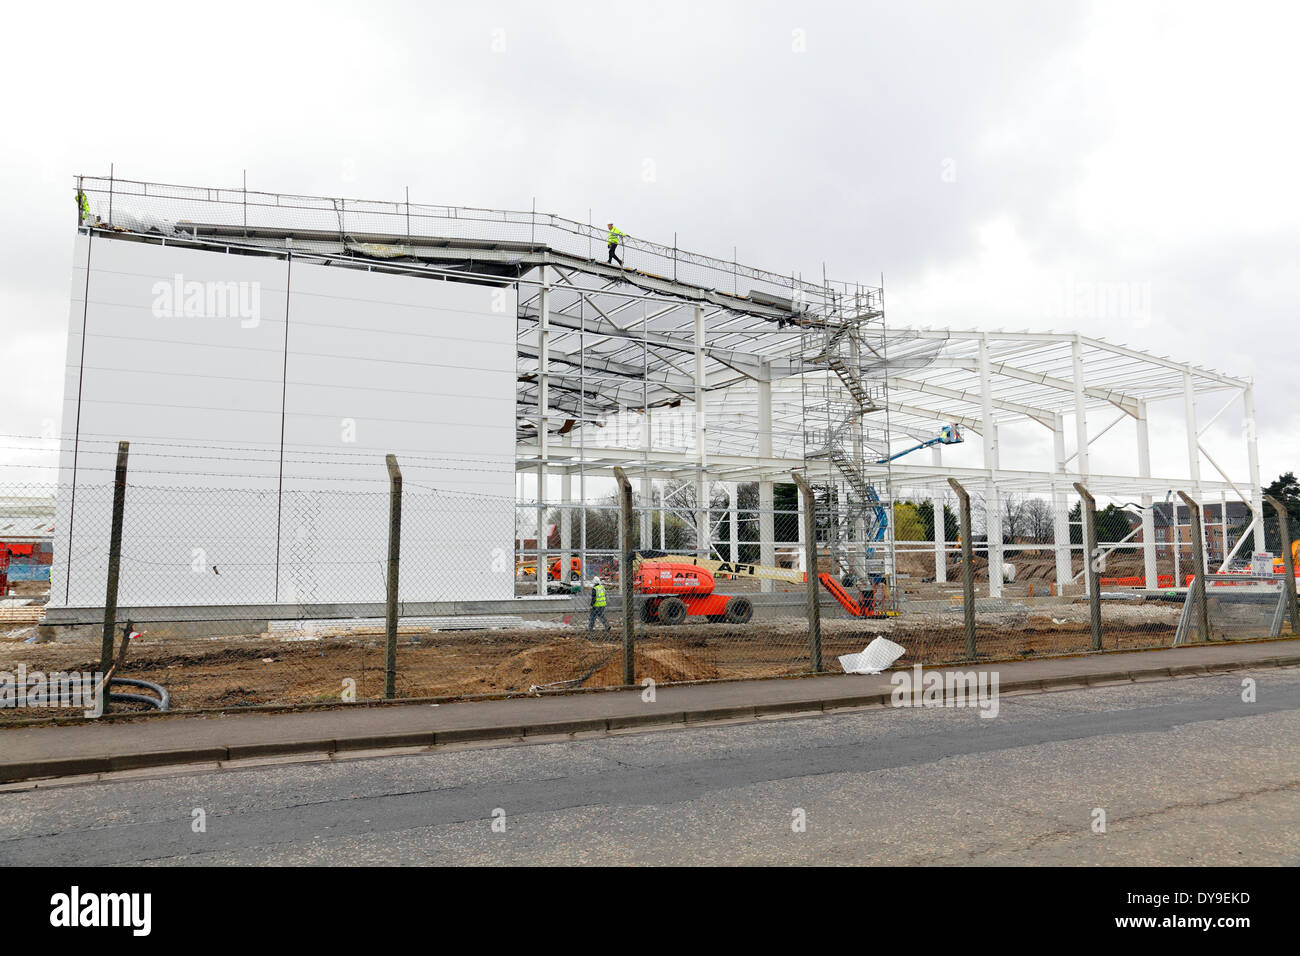 A warehouse under construction in Scotland, UK Stock Photo